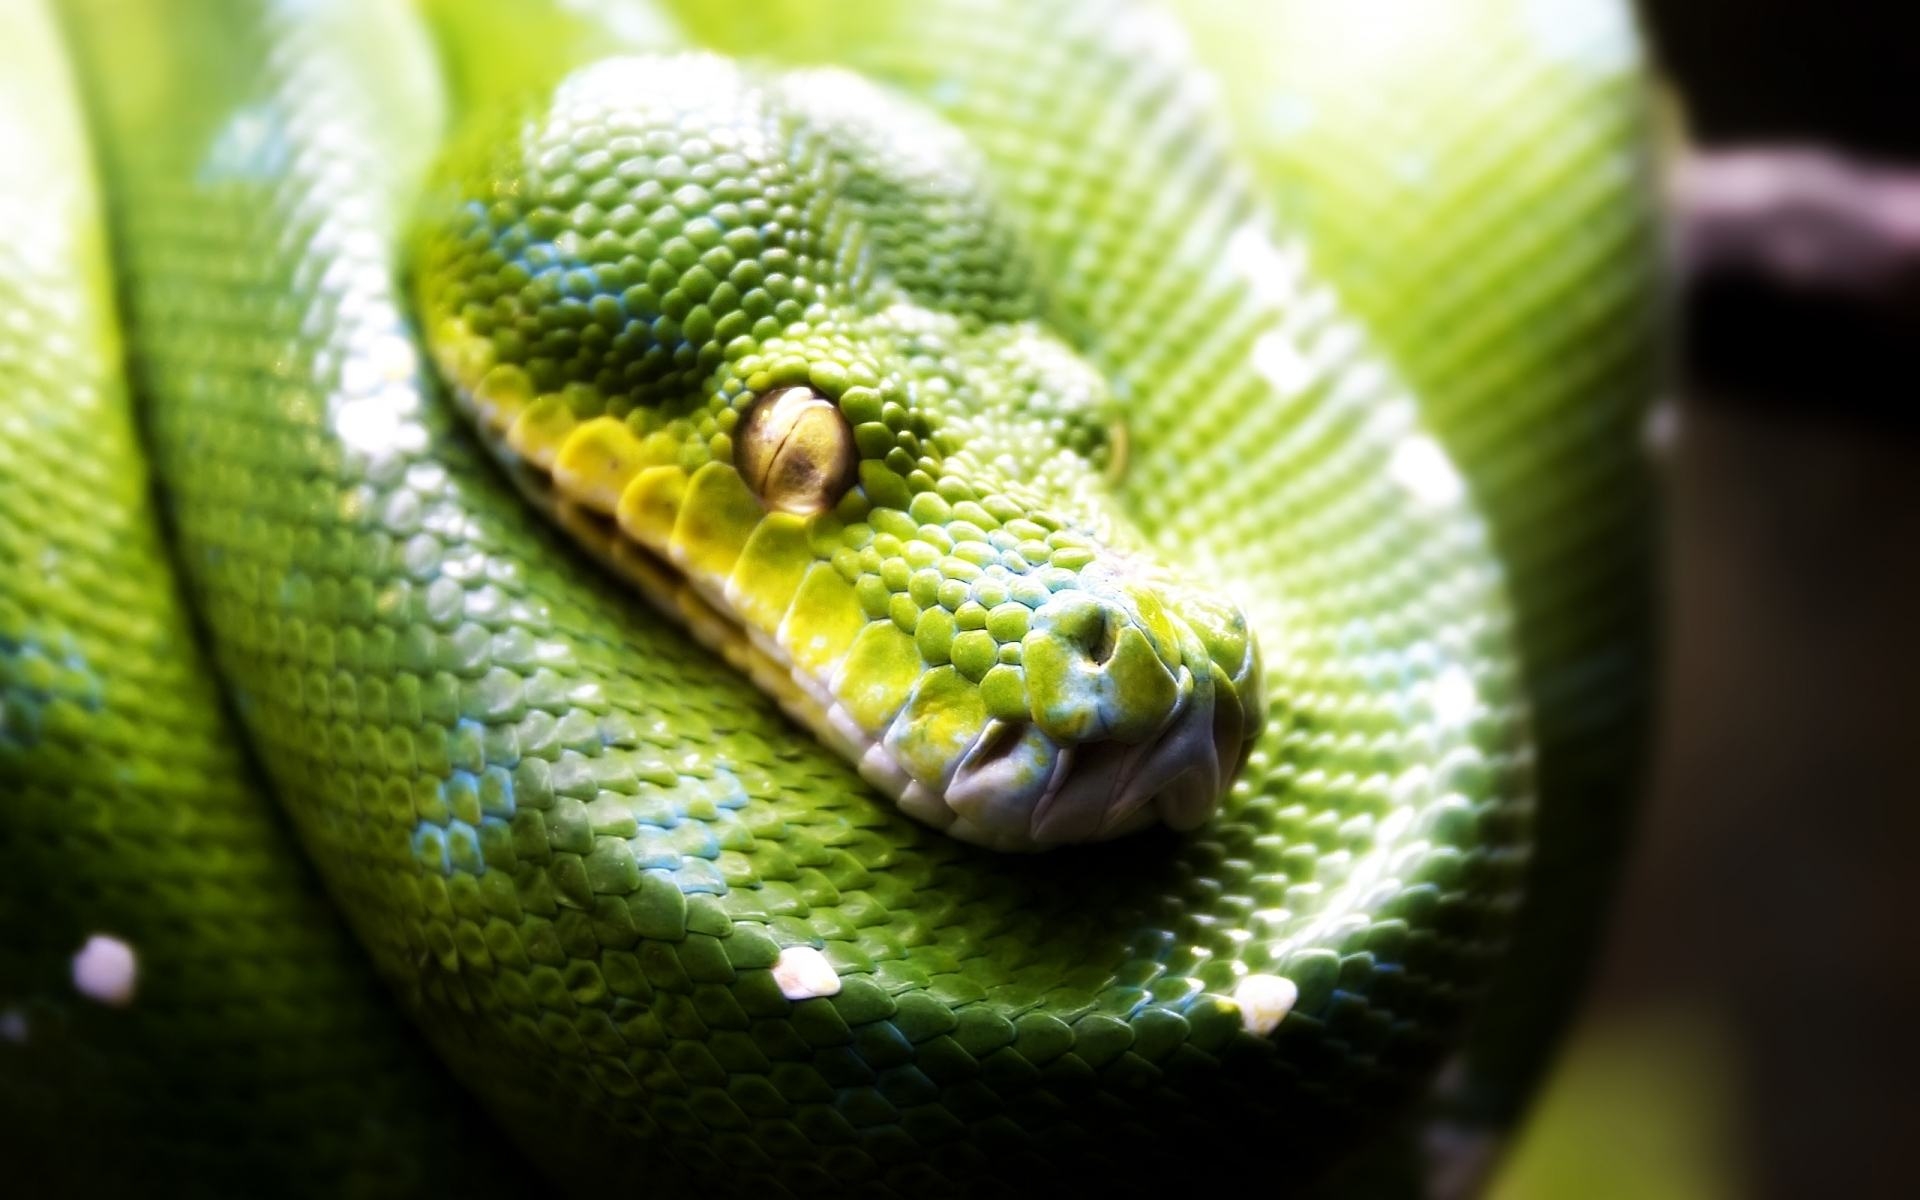  Backgrounds   wallpaper green snake wallpapers background cool